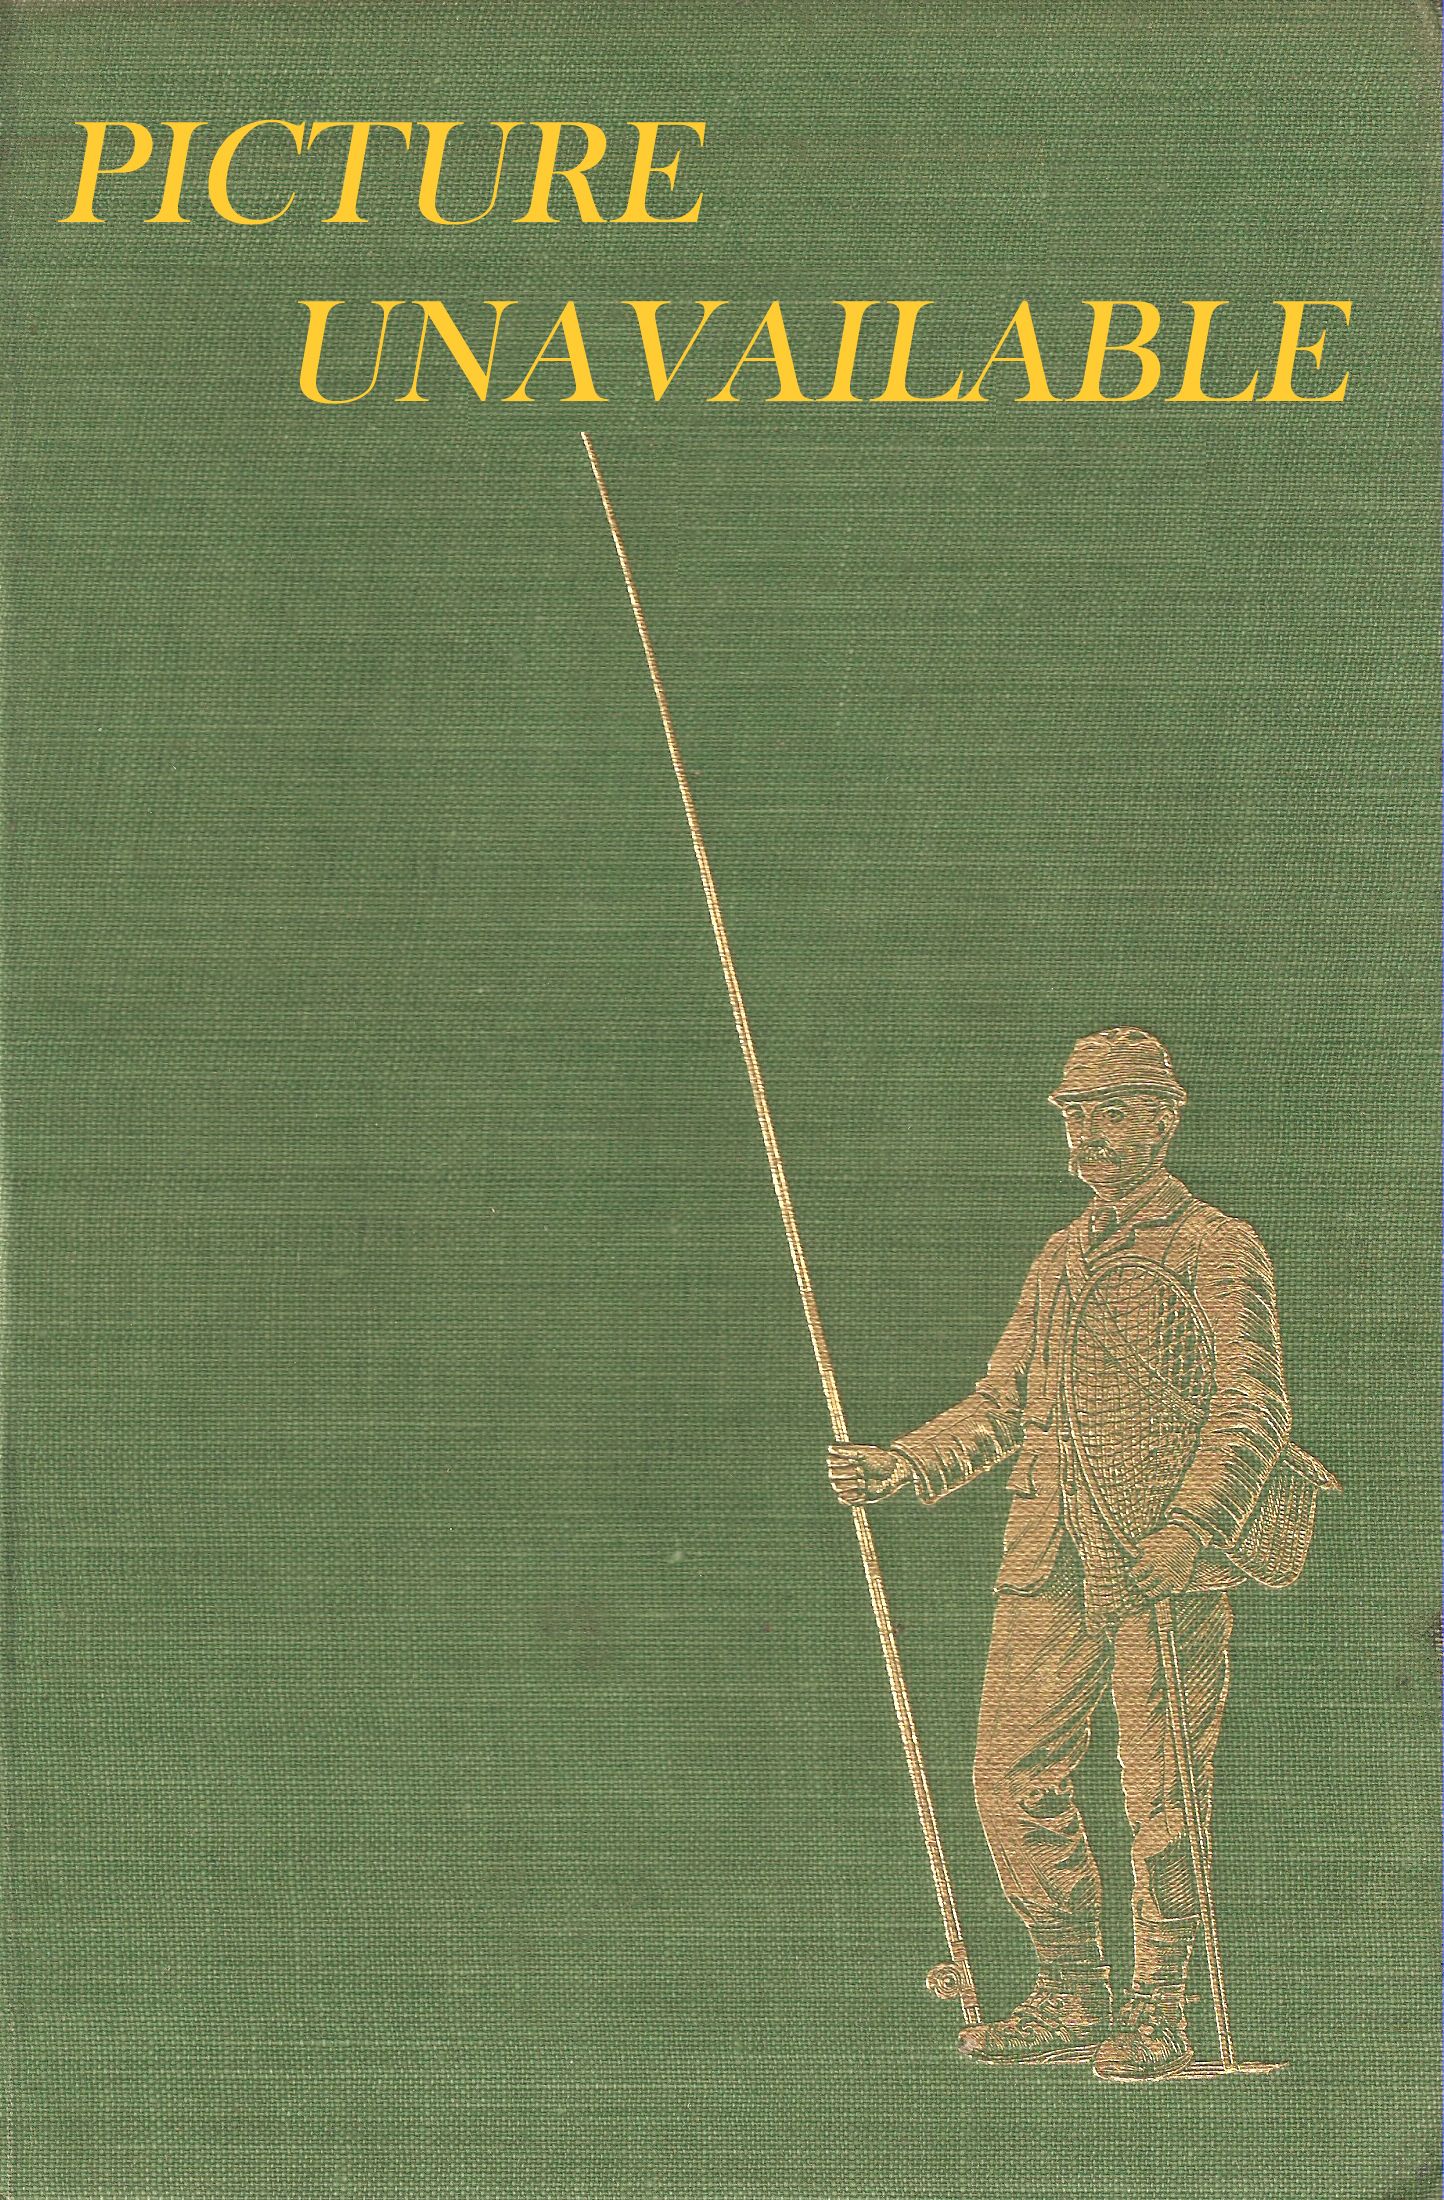 THE COMPLEAT ANGLER: OR THE CONTEMPLATIVE MAN'S RECREATION. BEING A  DISCOURSE OF FISH AND FISHING NOT UNWORTHY THE PERUSAL OF MOST ANGLERS.  Izaak Walton and Charles Cotton. Nelson Parkside Classics Edition. Variant  of Coigney 398 The Ninth Nelson Editi